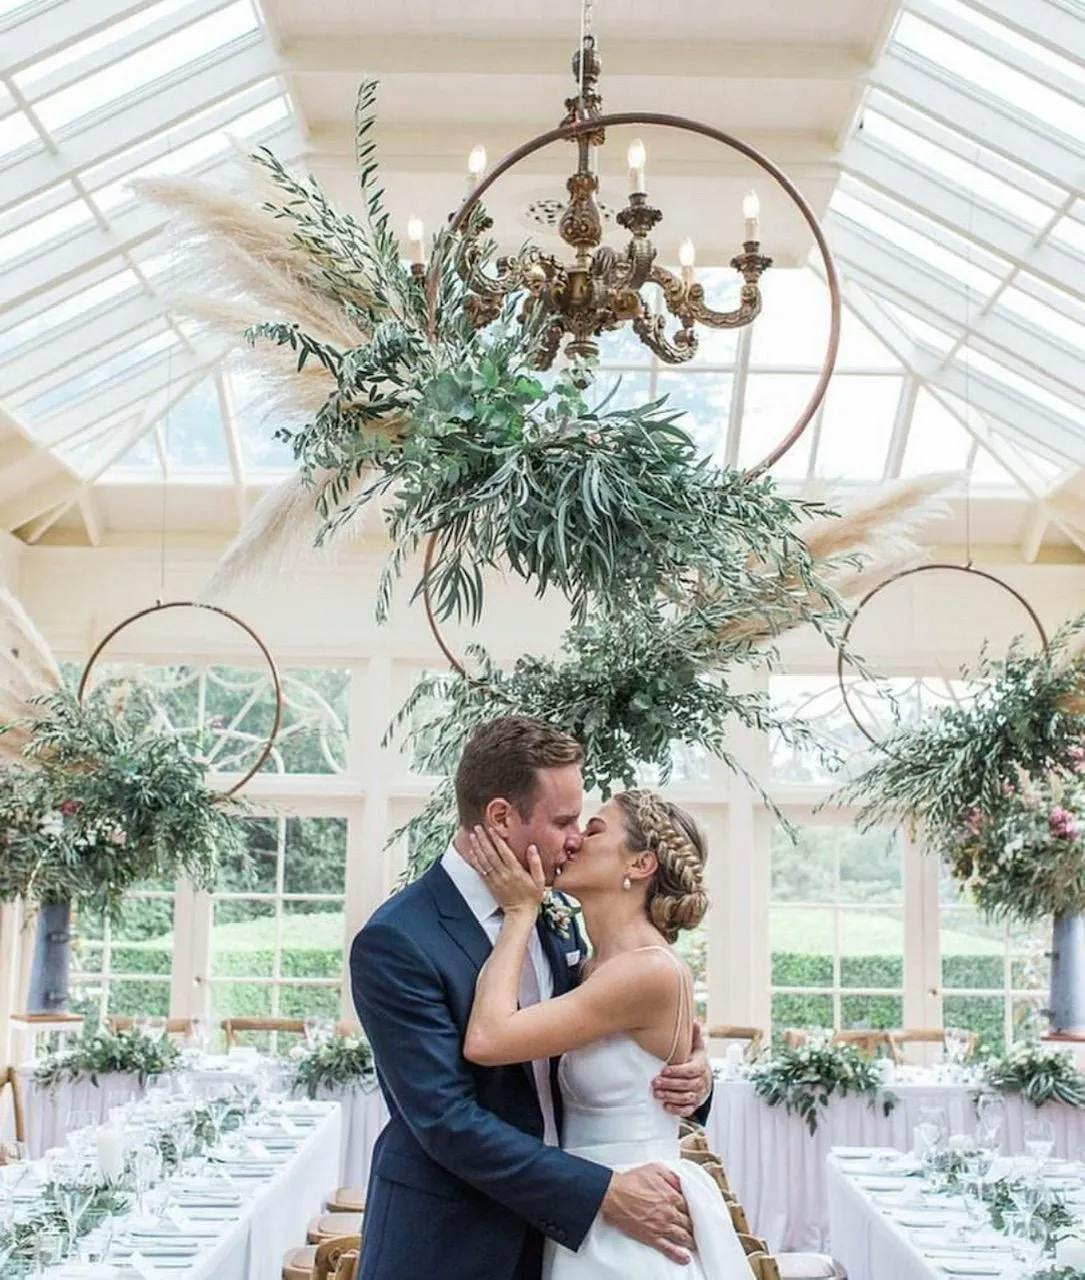 A bride and groom share a kiss under a chandelier adorned with greenery and flowers. They are in an elegantly decorated venue with large windows, circular floral arrangements, and long tables set for a wedding reception. The bride wears a white gown and the groom wears a blue suit.